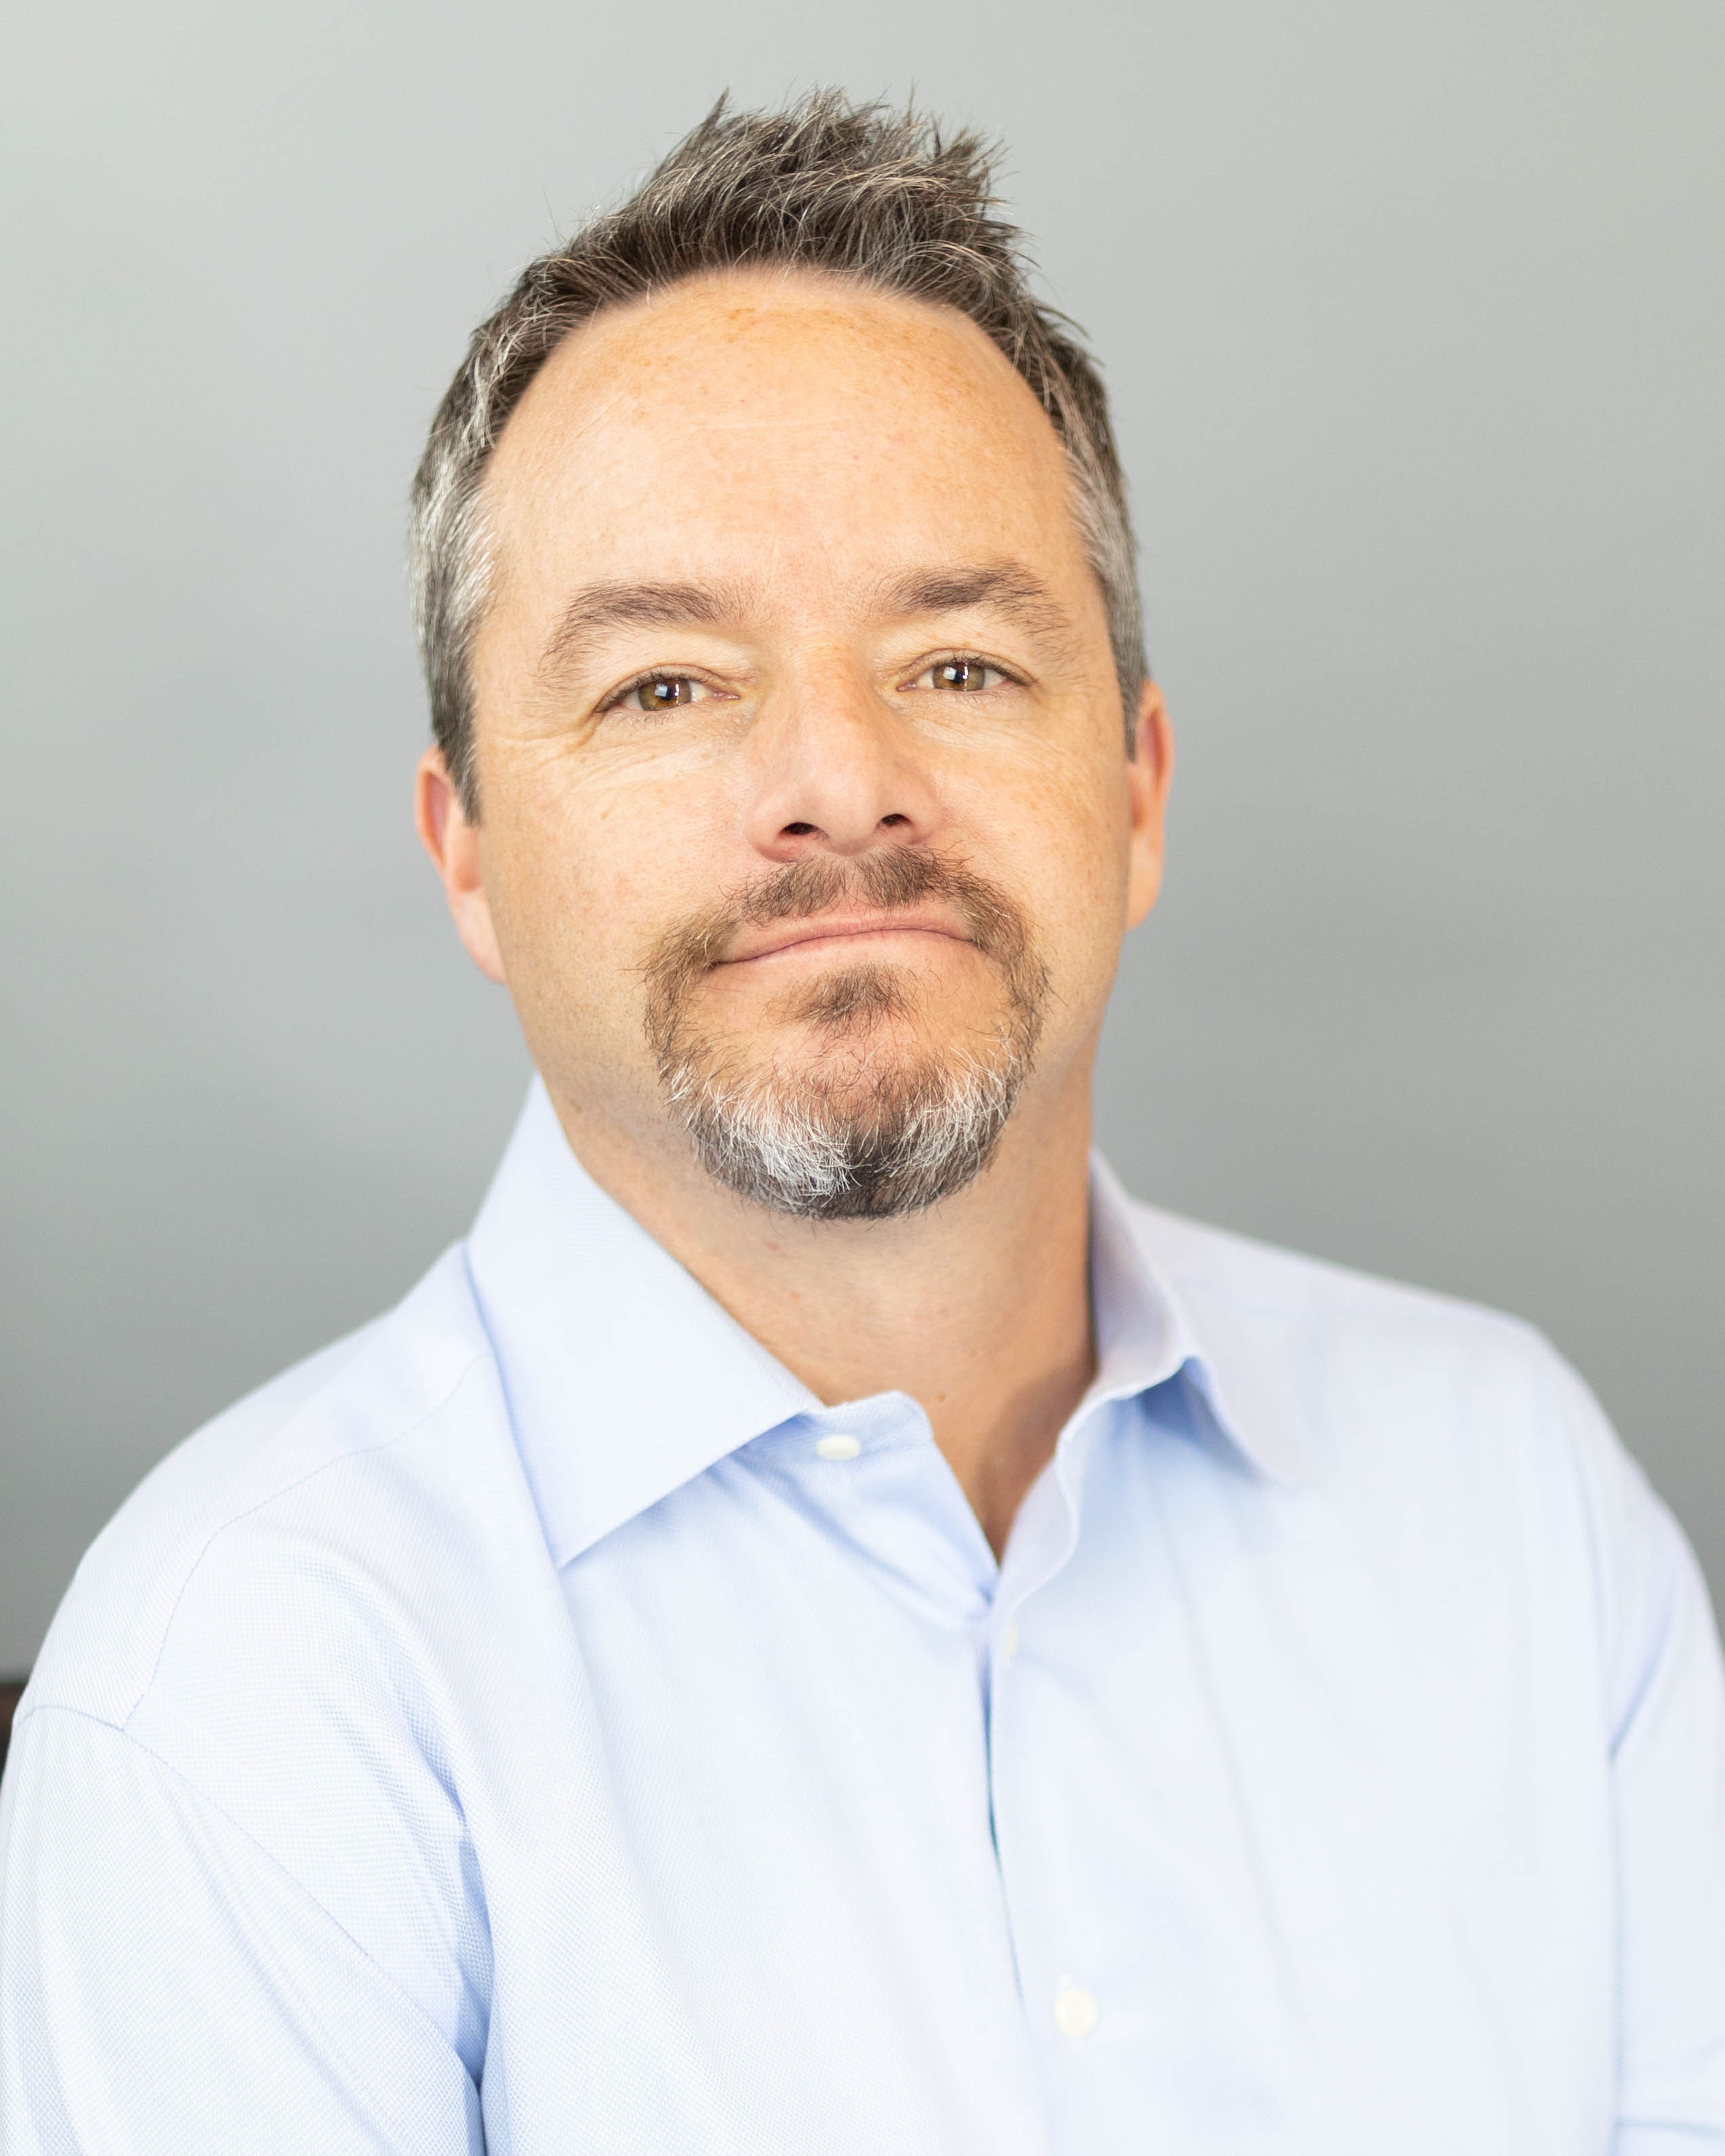 Cloudvirga has announced the promotion of Daniel Sogorka to the role of chief executive officer